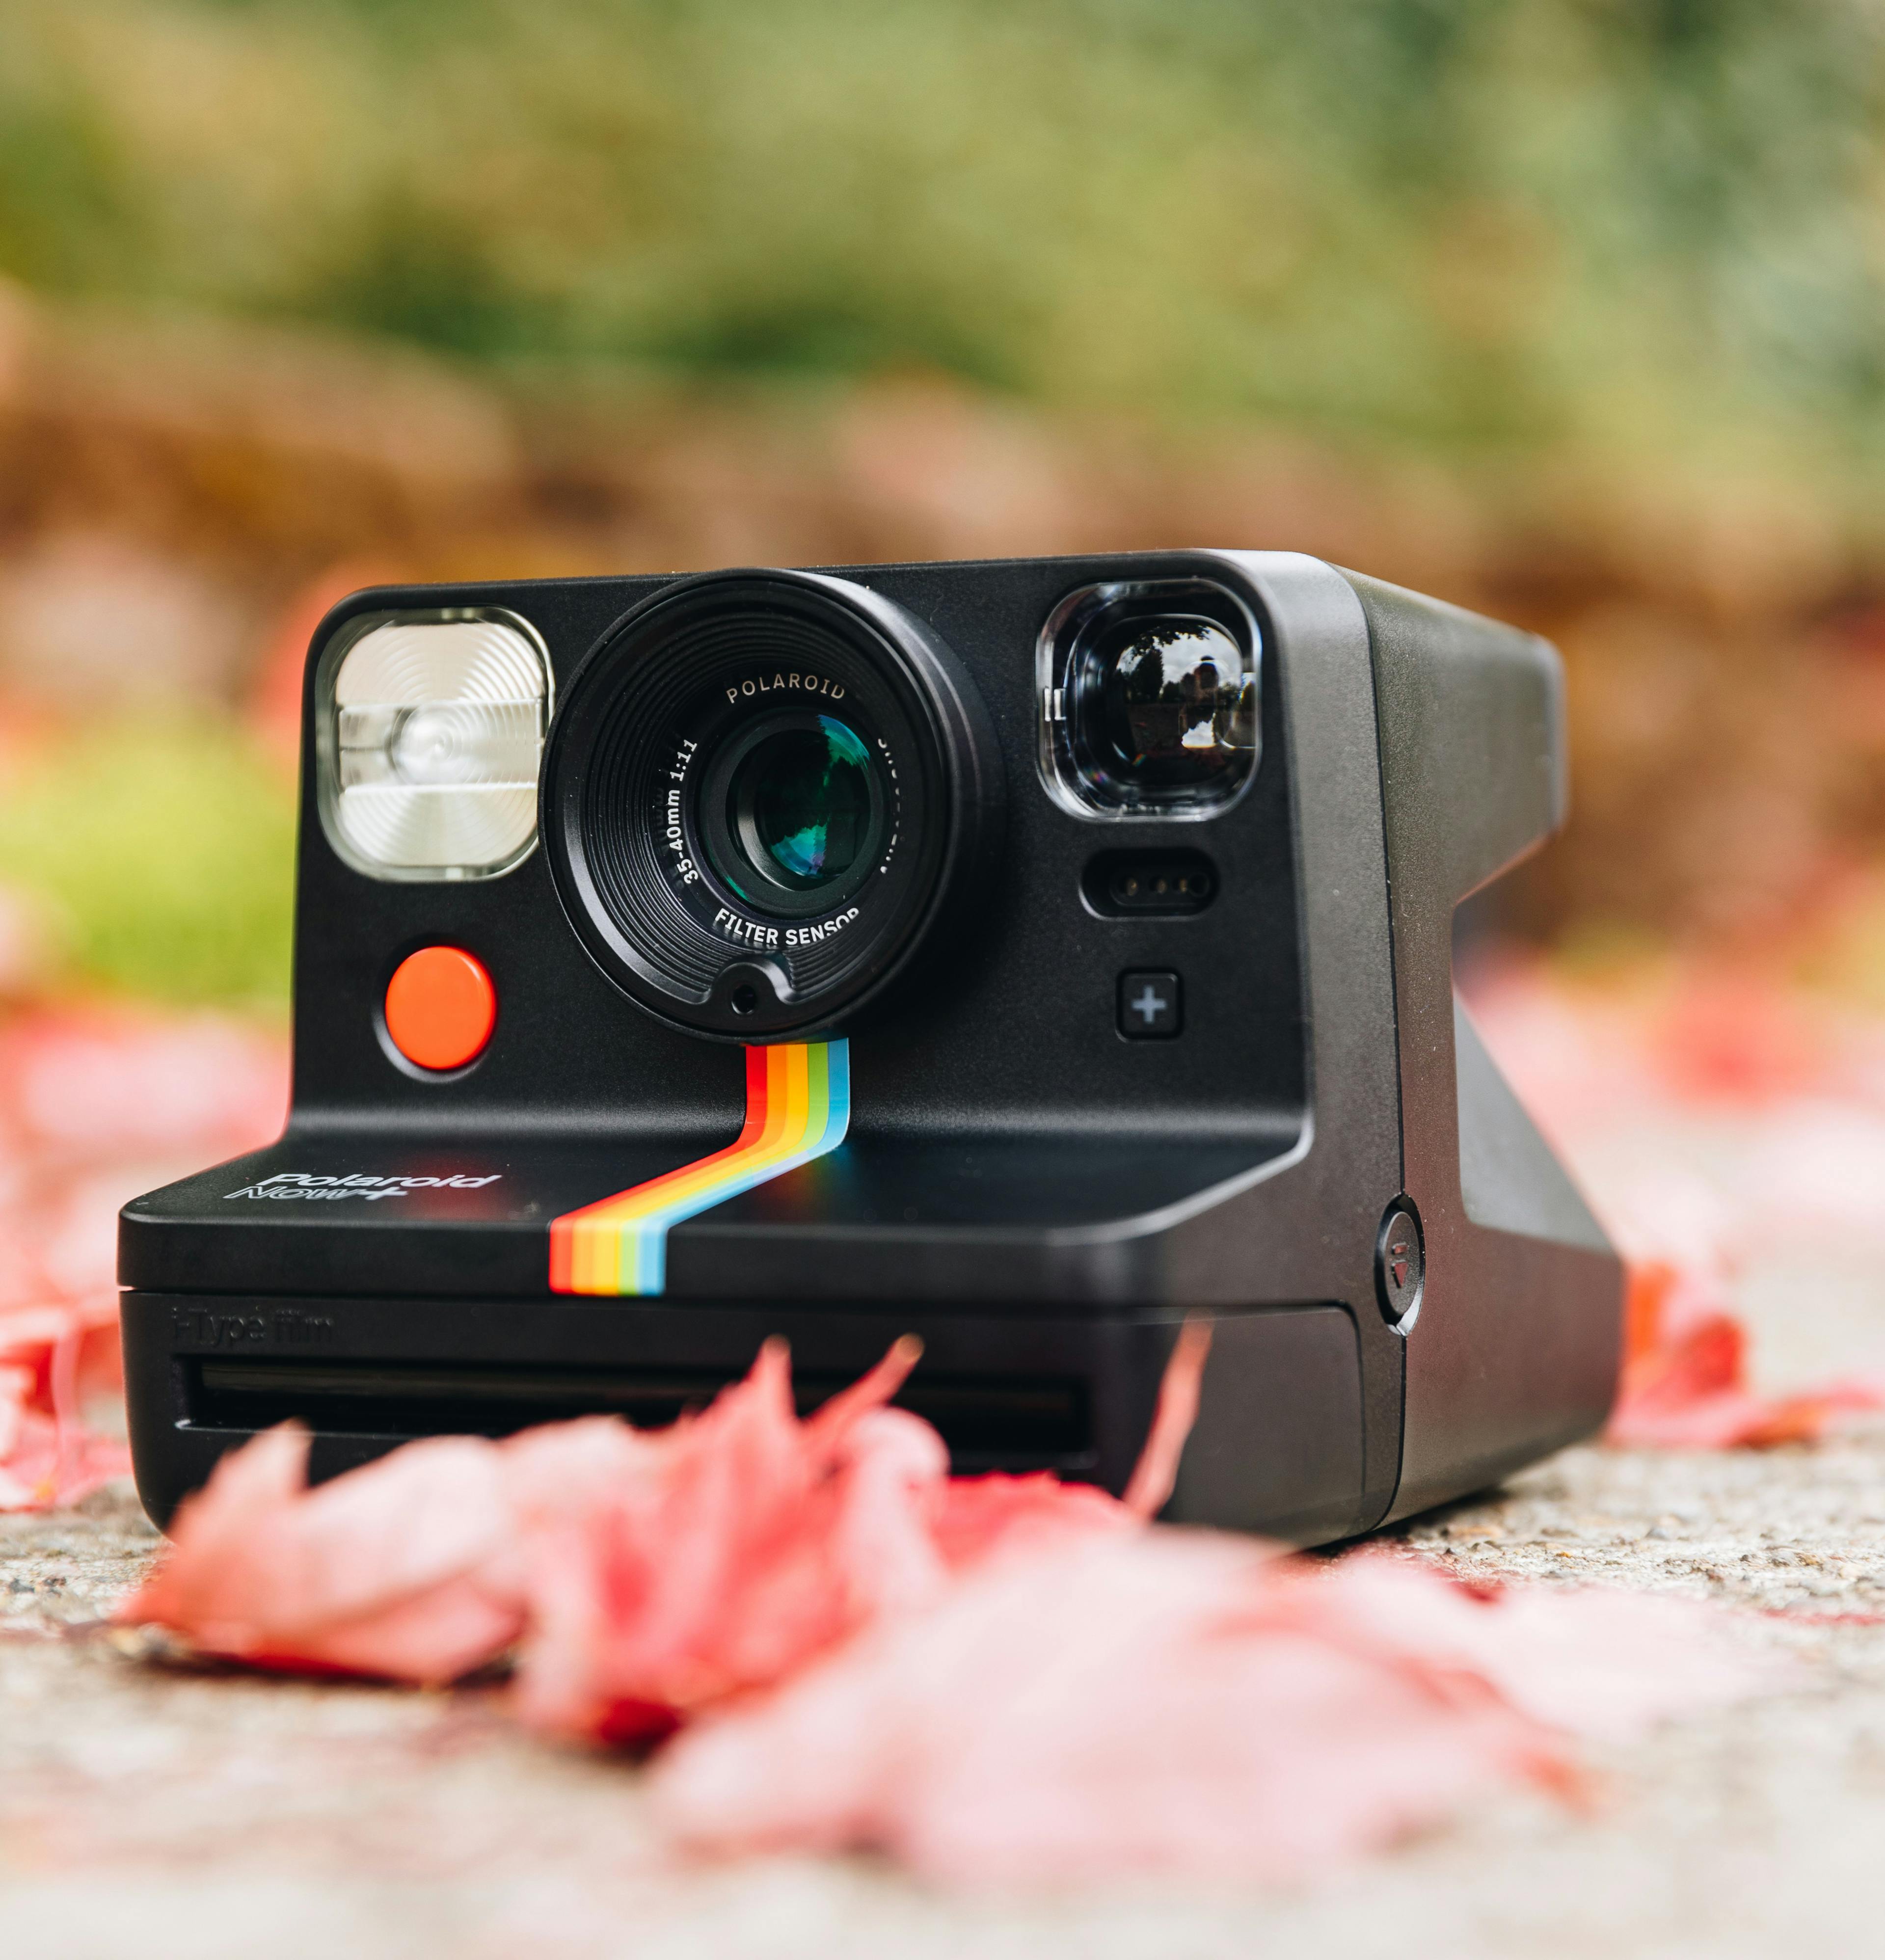 The Polaroid Now+ Hands-On Review